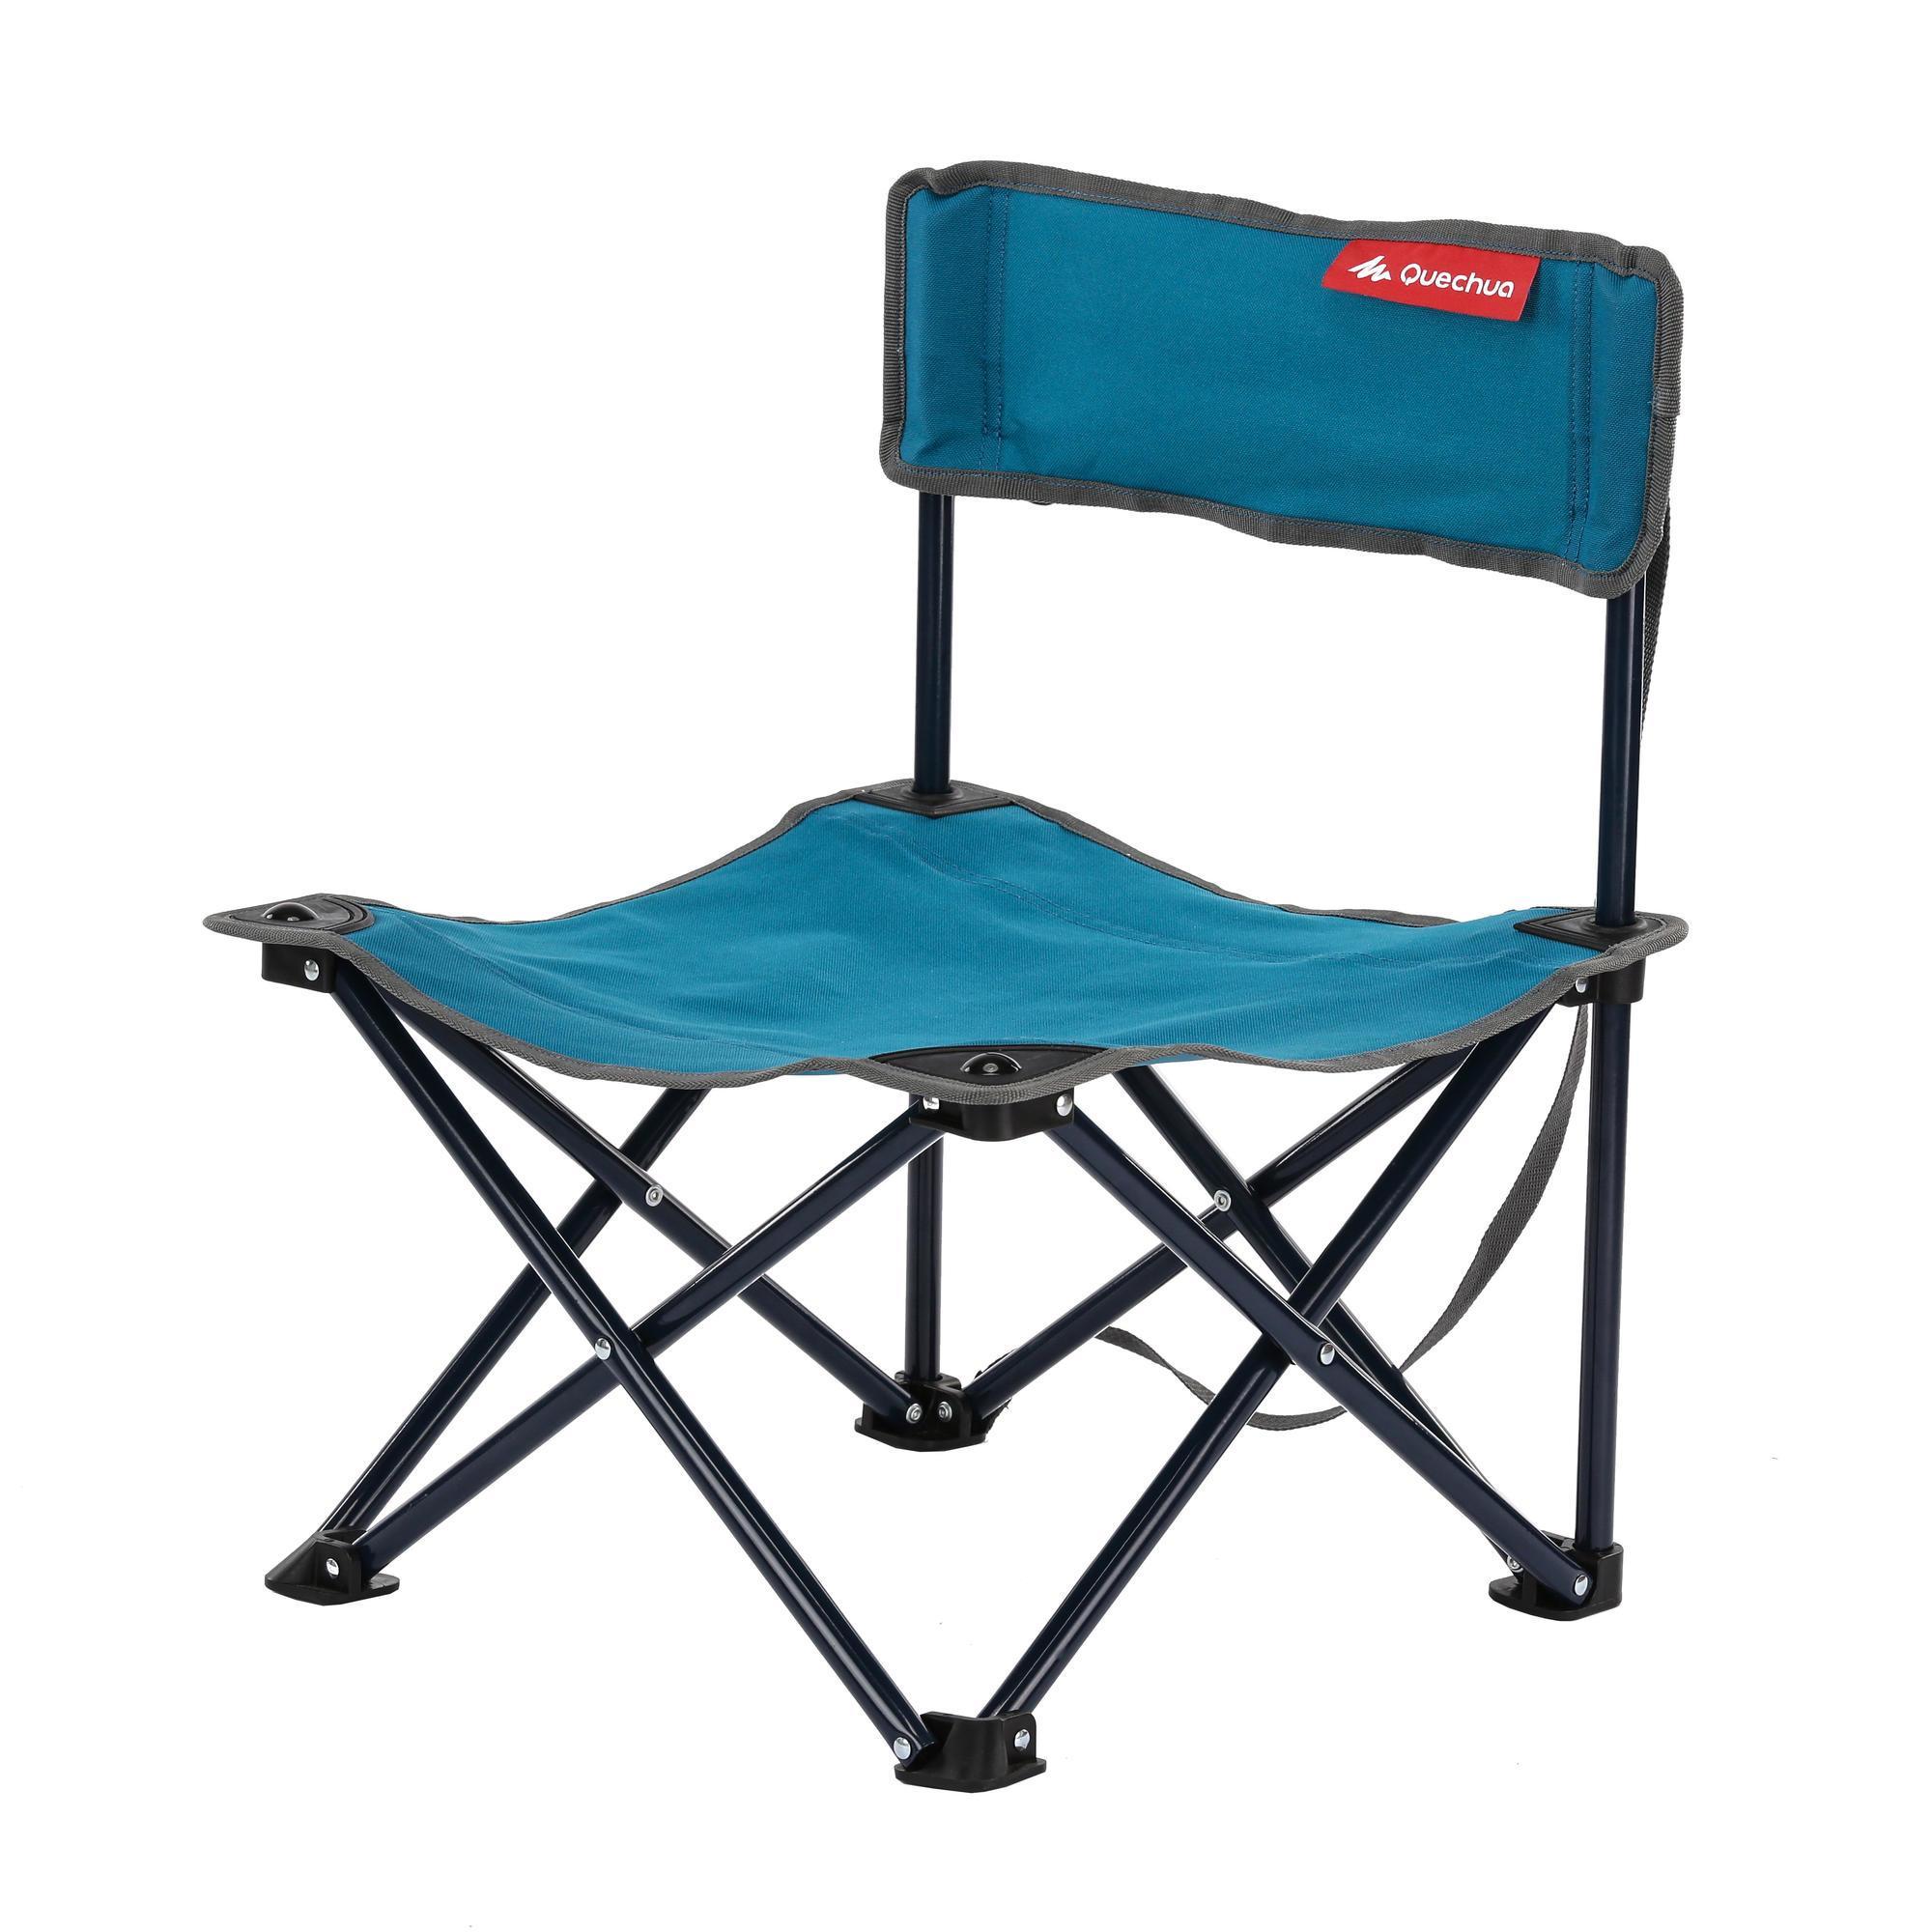 Low camping chair - Decathlon